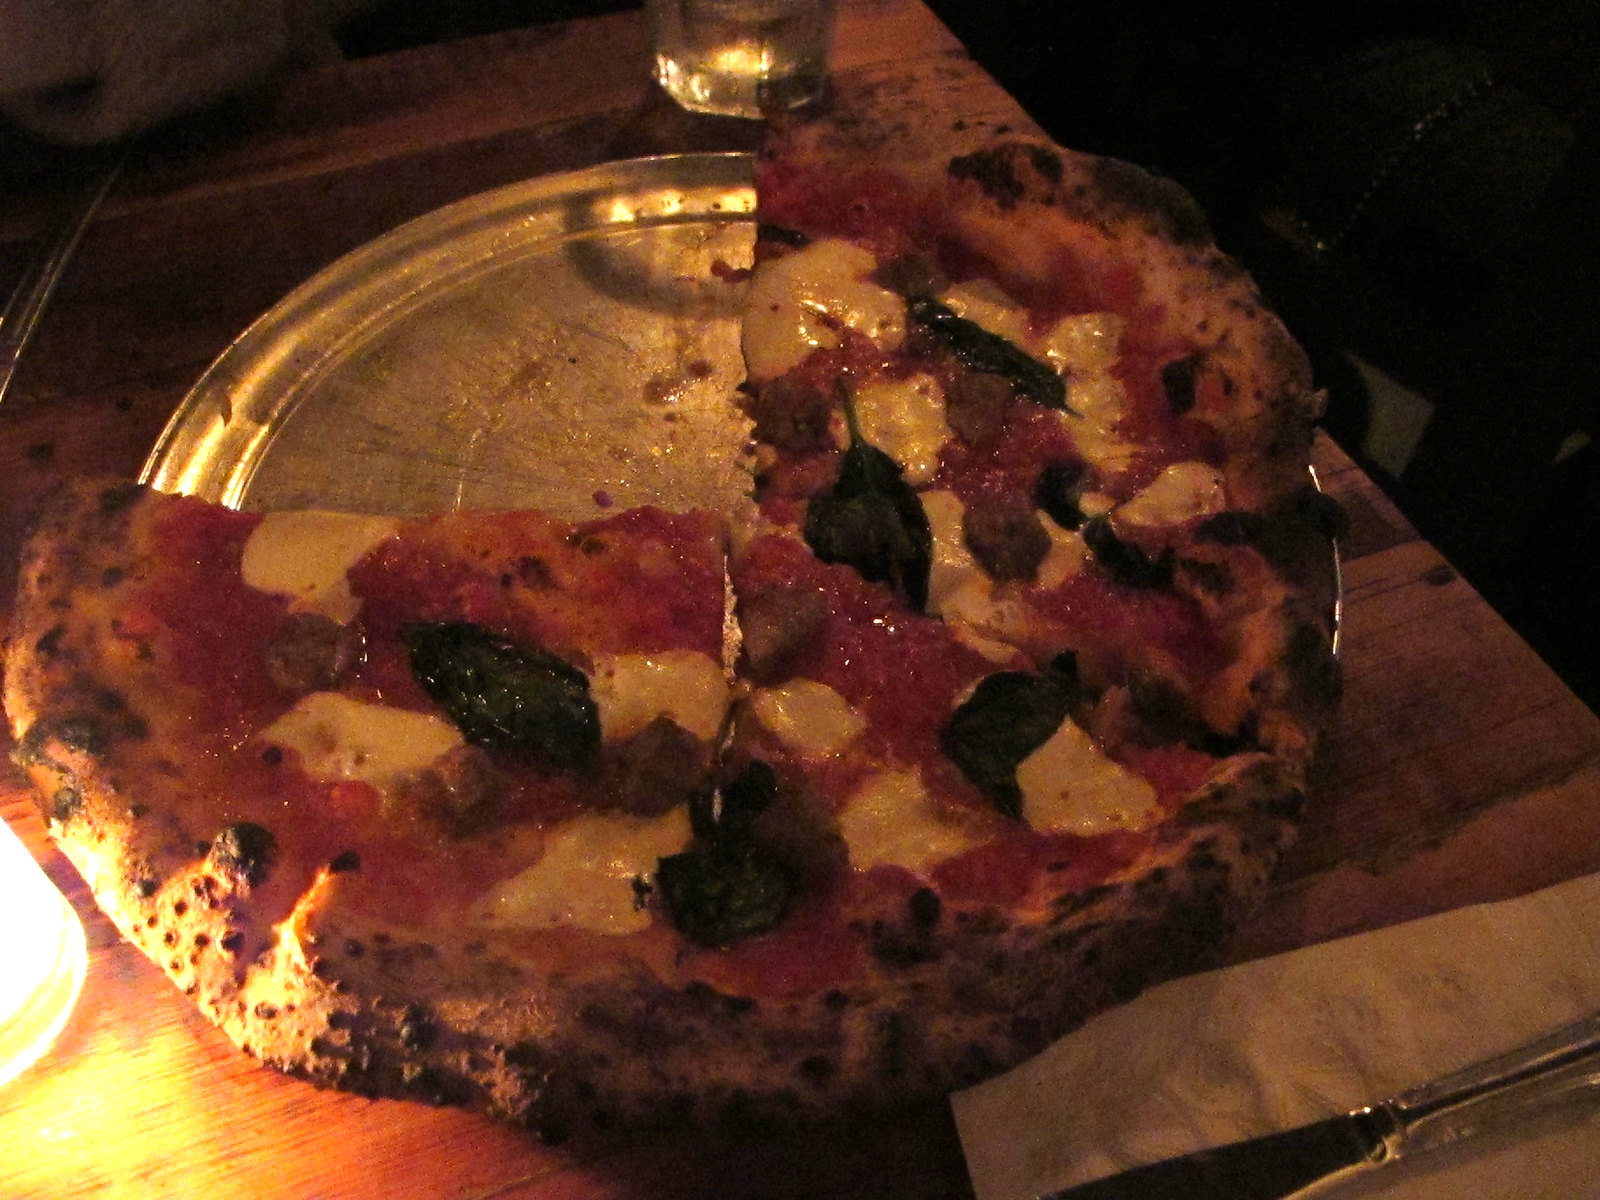 Pizza by Candlelight (Red), Paulie Gee's Pizzeria, Brooklyn NY